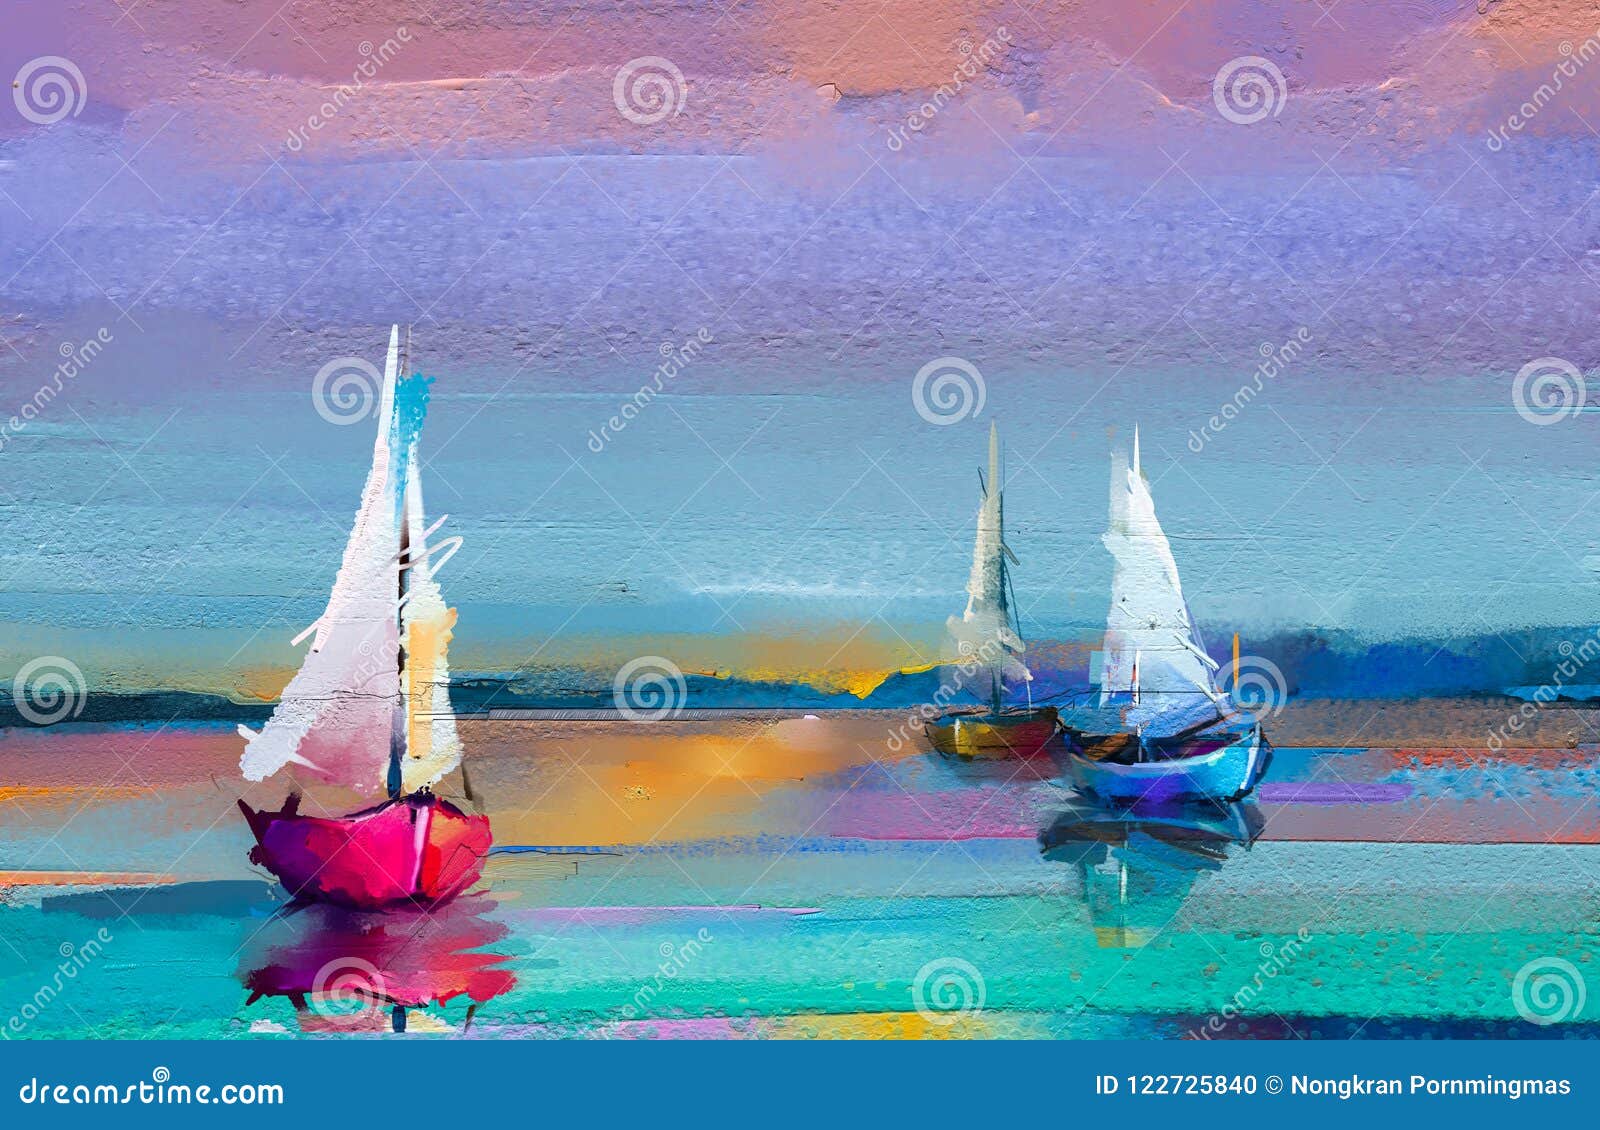 impressionism image of seascape paintings with sunlight background. modern art oil paintings with boat, sail on sea.